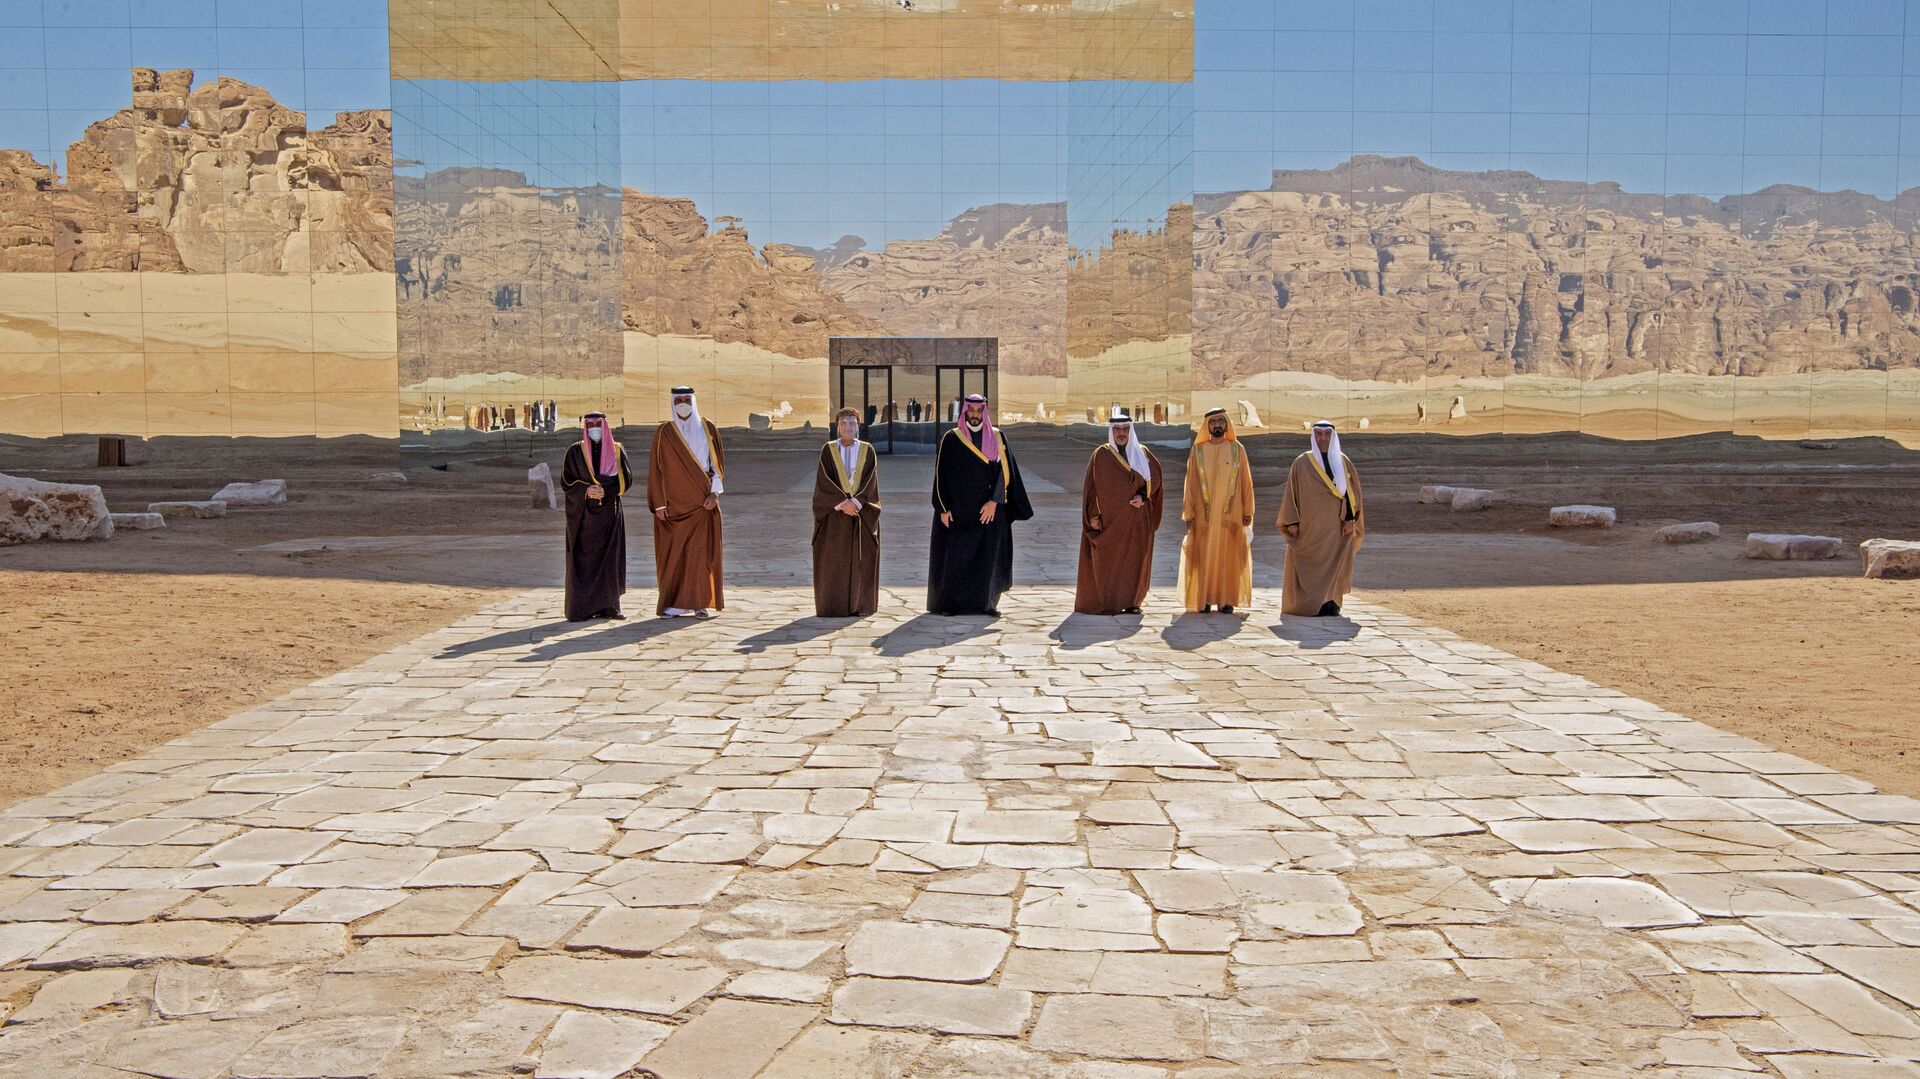 A handout picture provided by the Saudi Royal Palace on January 5, 2021, shows from L to R: Kuwaiti Emir Sheikh Nawaf al-Ahmad Al-Sabah, Emir of Qatar Tamim bin Hamad Al-Thani, Omani Deputy Prime Minister Fahd Bin Mahmud, Saudi Crown Prince Mohammed bin Salman, Bahrain's Crown Prince Salman bin Hamad Al-Khalifa, Dubai's Ruler and UAE Vice President Sheikh Mohammed bin Rashid Al-Maktoum and Nayef al-Hajraf, secretary-general of the Gulf Cooperation Council (GCC) posing for a pictures before the opening session of the 41st Gulf Cooperation Council (GCC) summit in the northwestern Saudi city of al-Ula. - Saudi Arabia's Crown Prince Mohammed bin Salman said that the Gulf states had signed an agreement on regional solidarity and stability at a summit aimed at resolving a three-year embargo against Qatar.  - Sputnik International, 1920, 18.03.2021